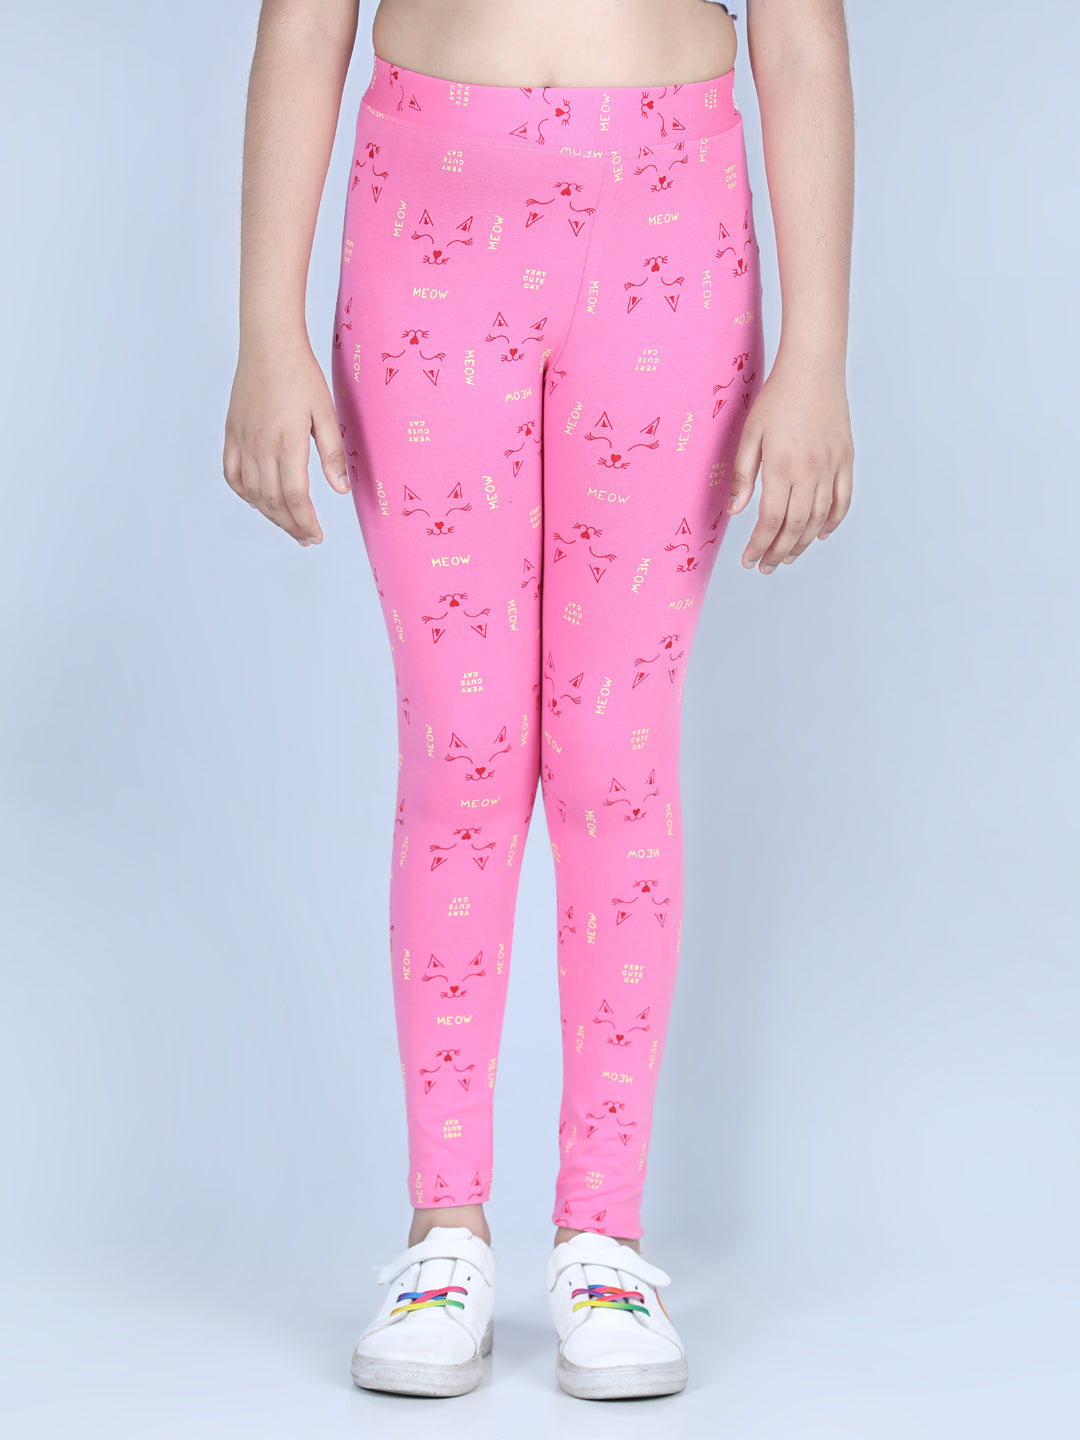 Girls Pack of 2 Printed Leggings with Flat Waistband-Pink & White